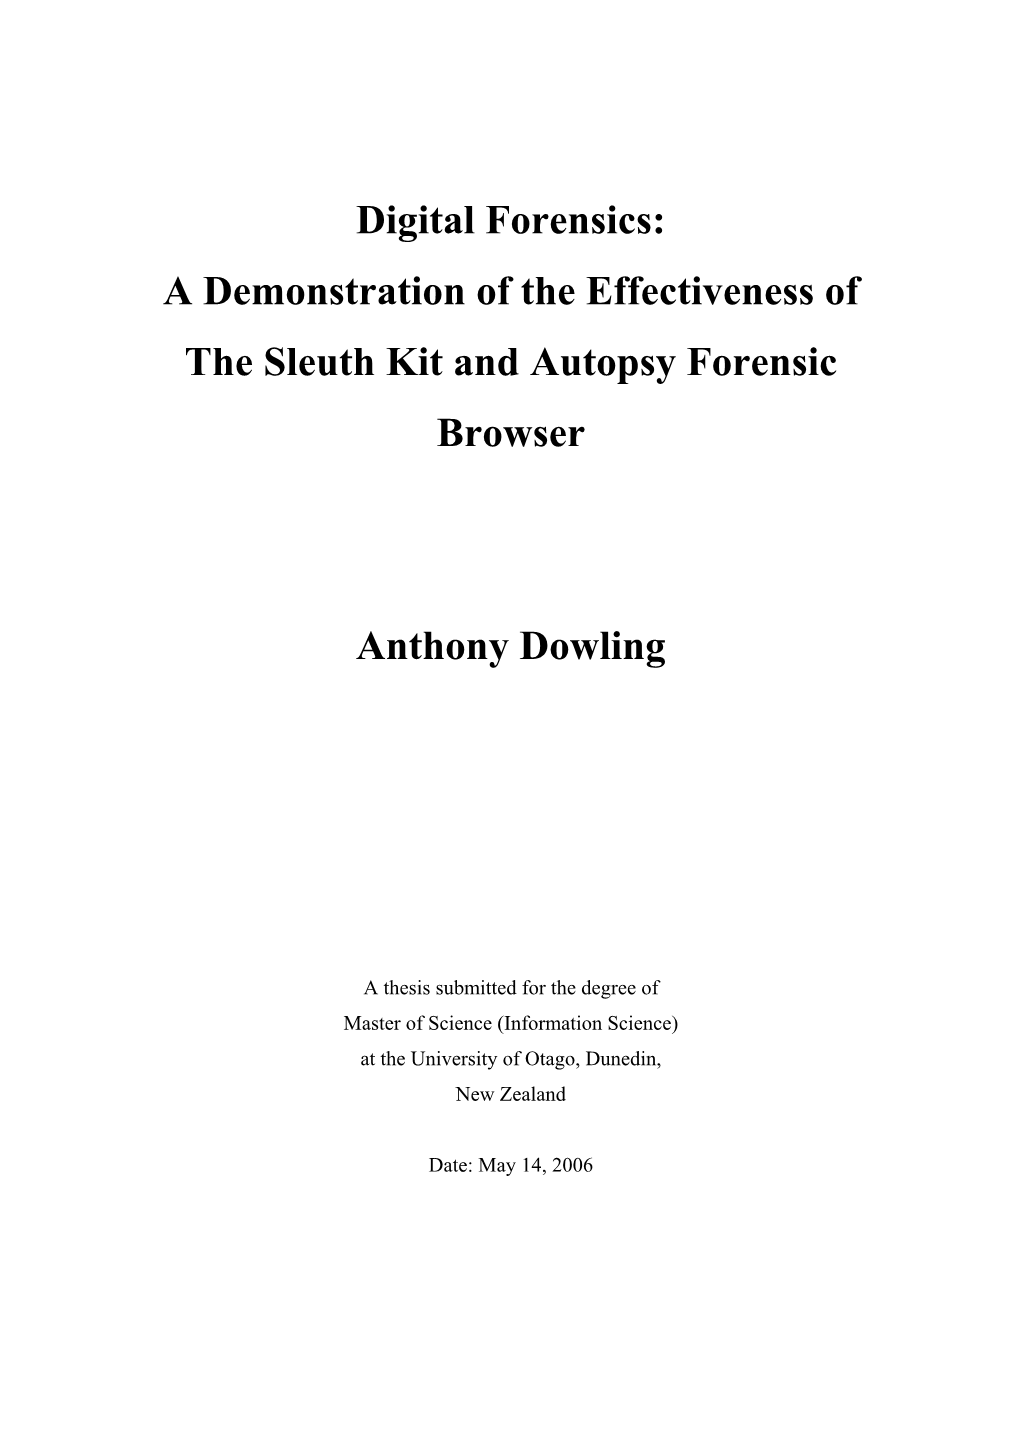 Digital Forensics: a Demonstration of the Effectiveness of the Sleuth Kit and Autopsy Forensic Browser